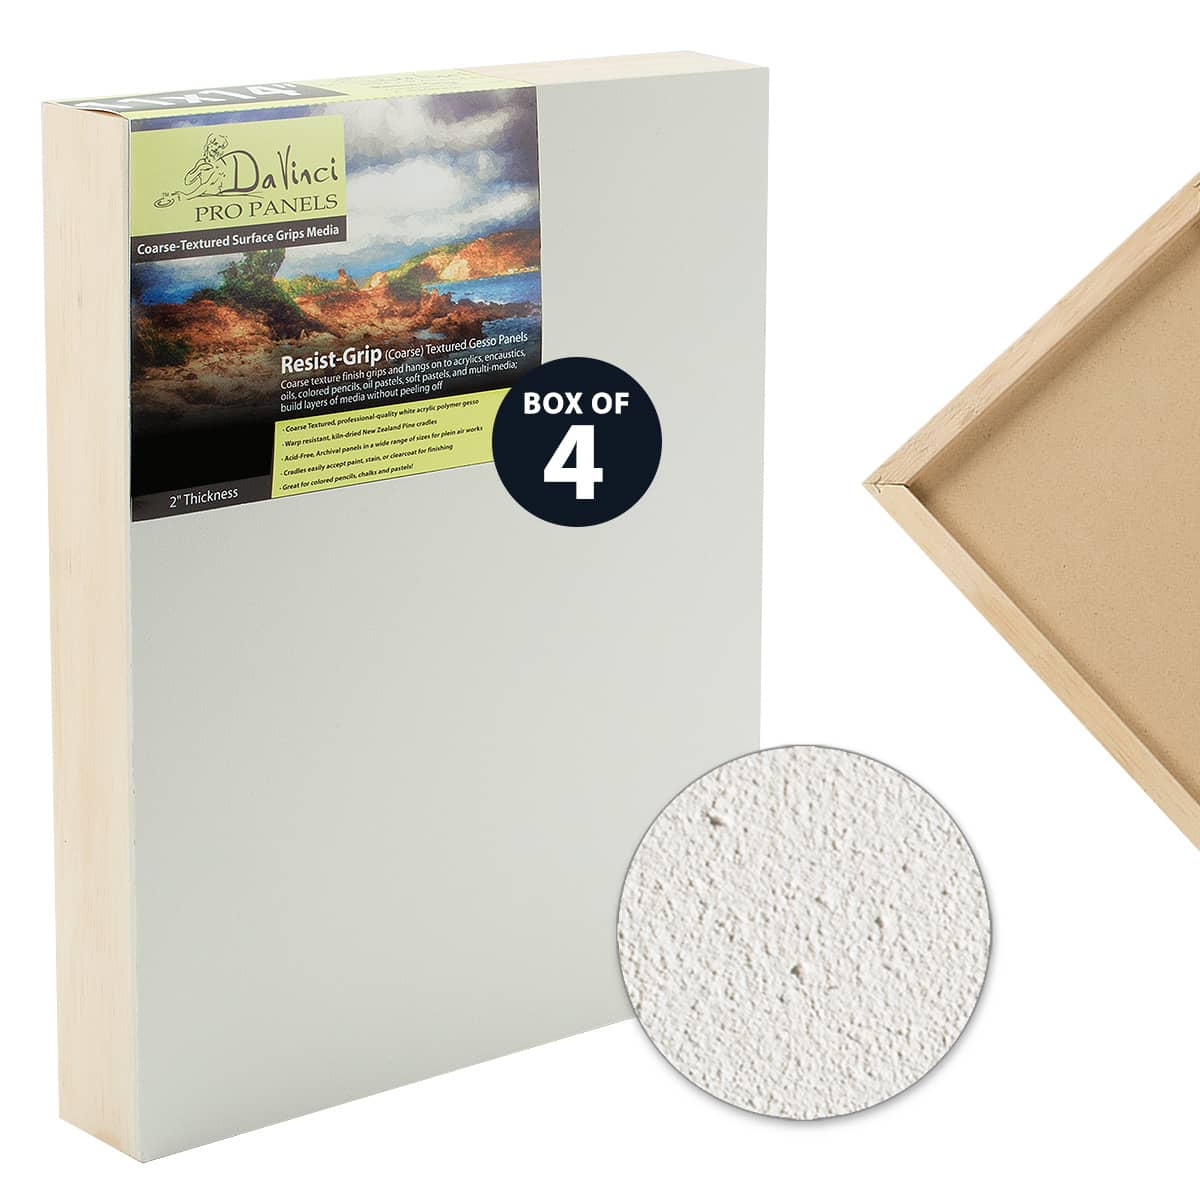 Craft & Pouring Art PHOENIX Gesso Wood Art Painting Panel Boards Professional 3/4 Inch Cradled Wood Hardboard Canvas for Mixed-Media 16x20 Inch/2 Pack Coarse Surface Wood Paint Pouring Panels 